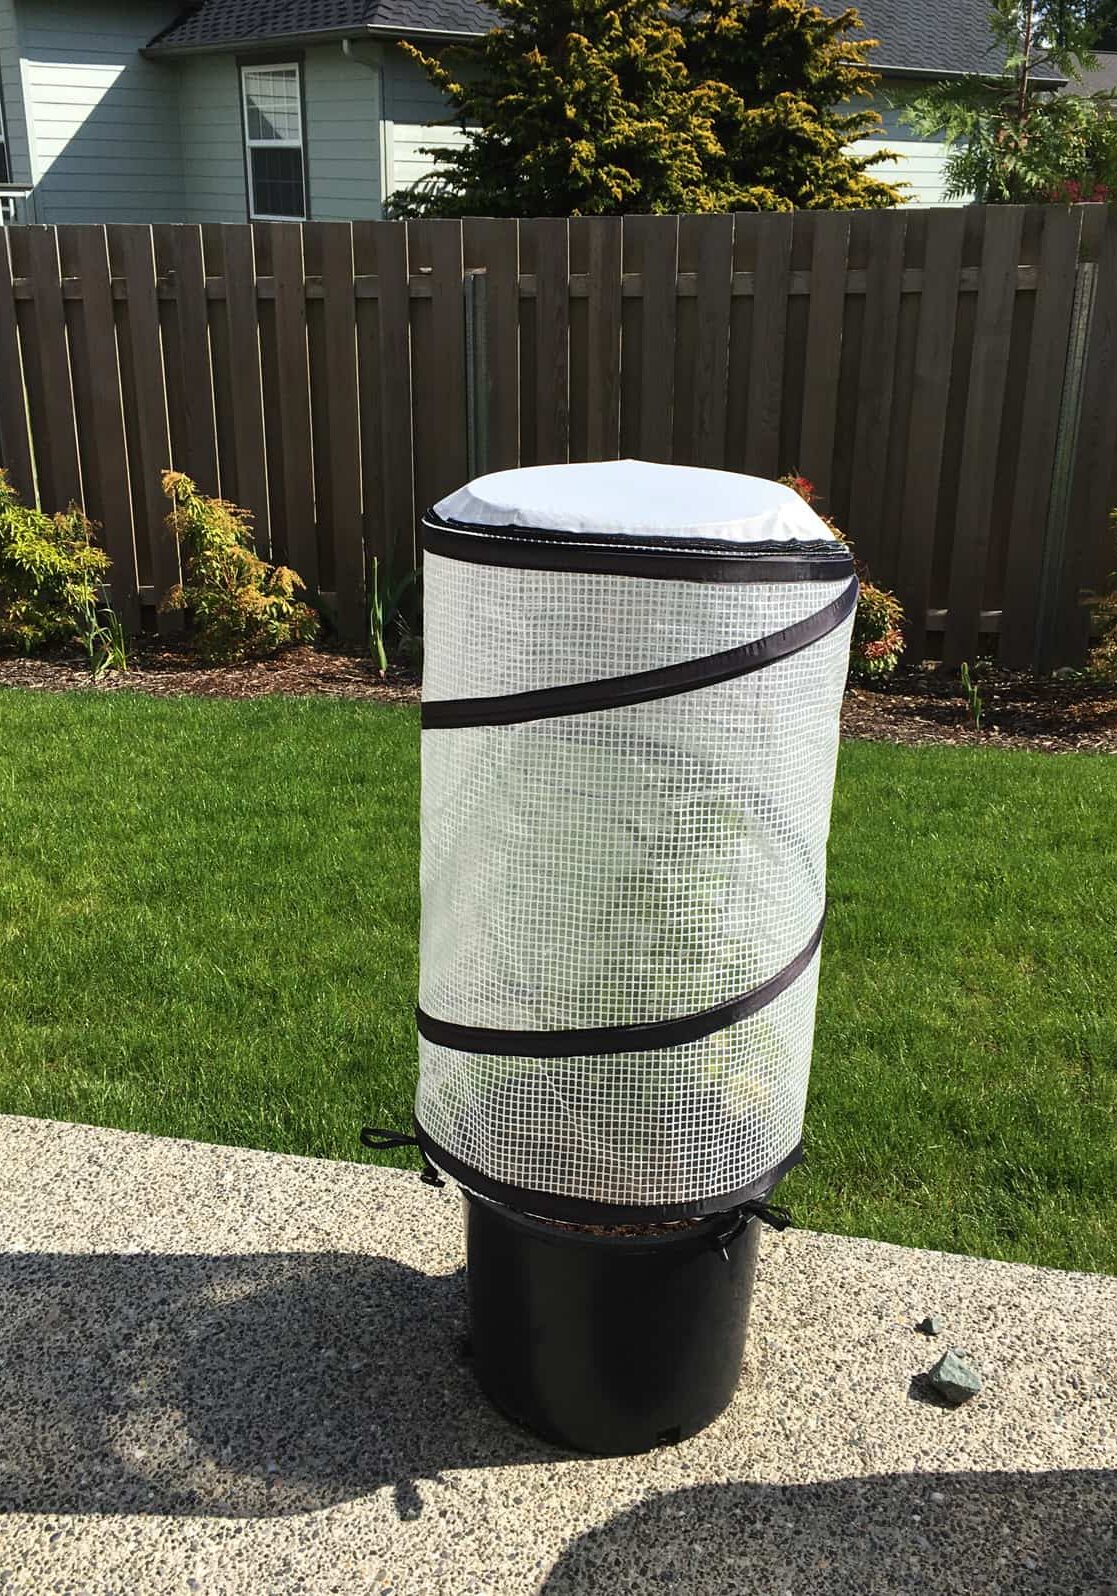 This cover stores flat and pops up to form a cylinder around a container or a plant to keep it warm and protect against the wind.  The top mesh unzips for ventilation and rainfall. Photo © Hallie Kintner